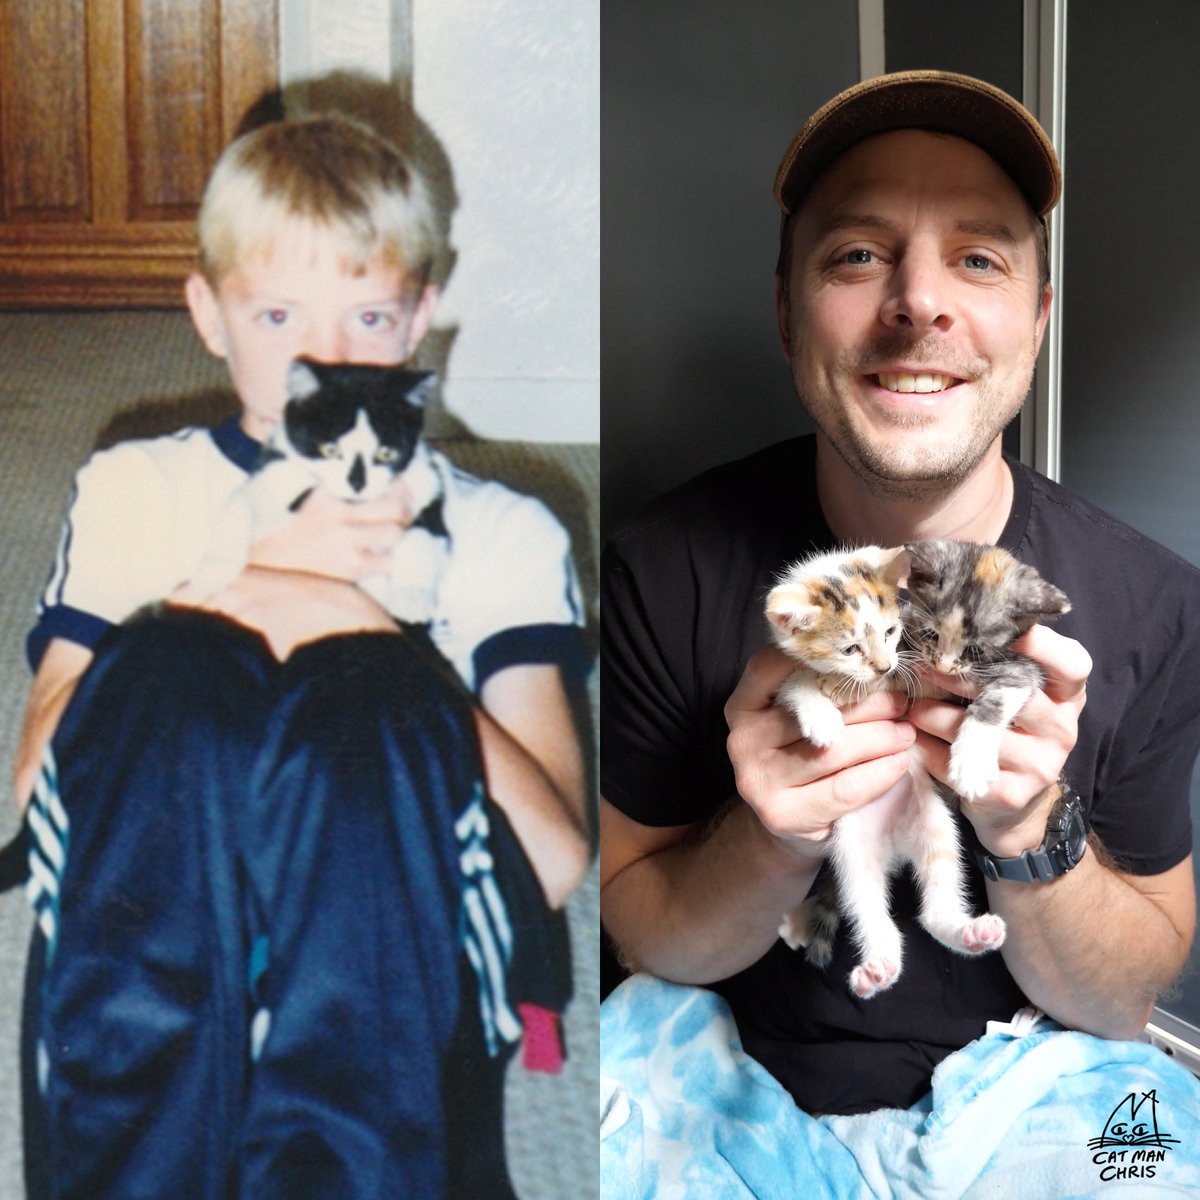 In honor of National Kids and Pets Day, here's a then and meow contrast... Who else was lucky enough to grow up with cats?? 😺

#WaybackWednesday #NationalKidsAndPetsDay #Cats #Kids #CatManChris